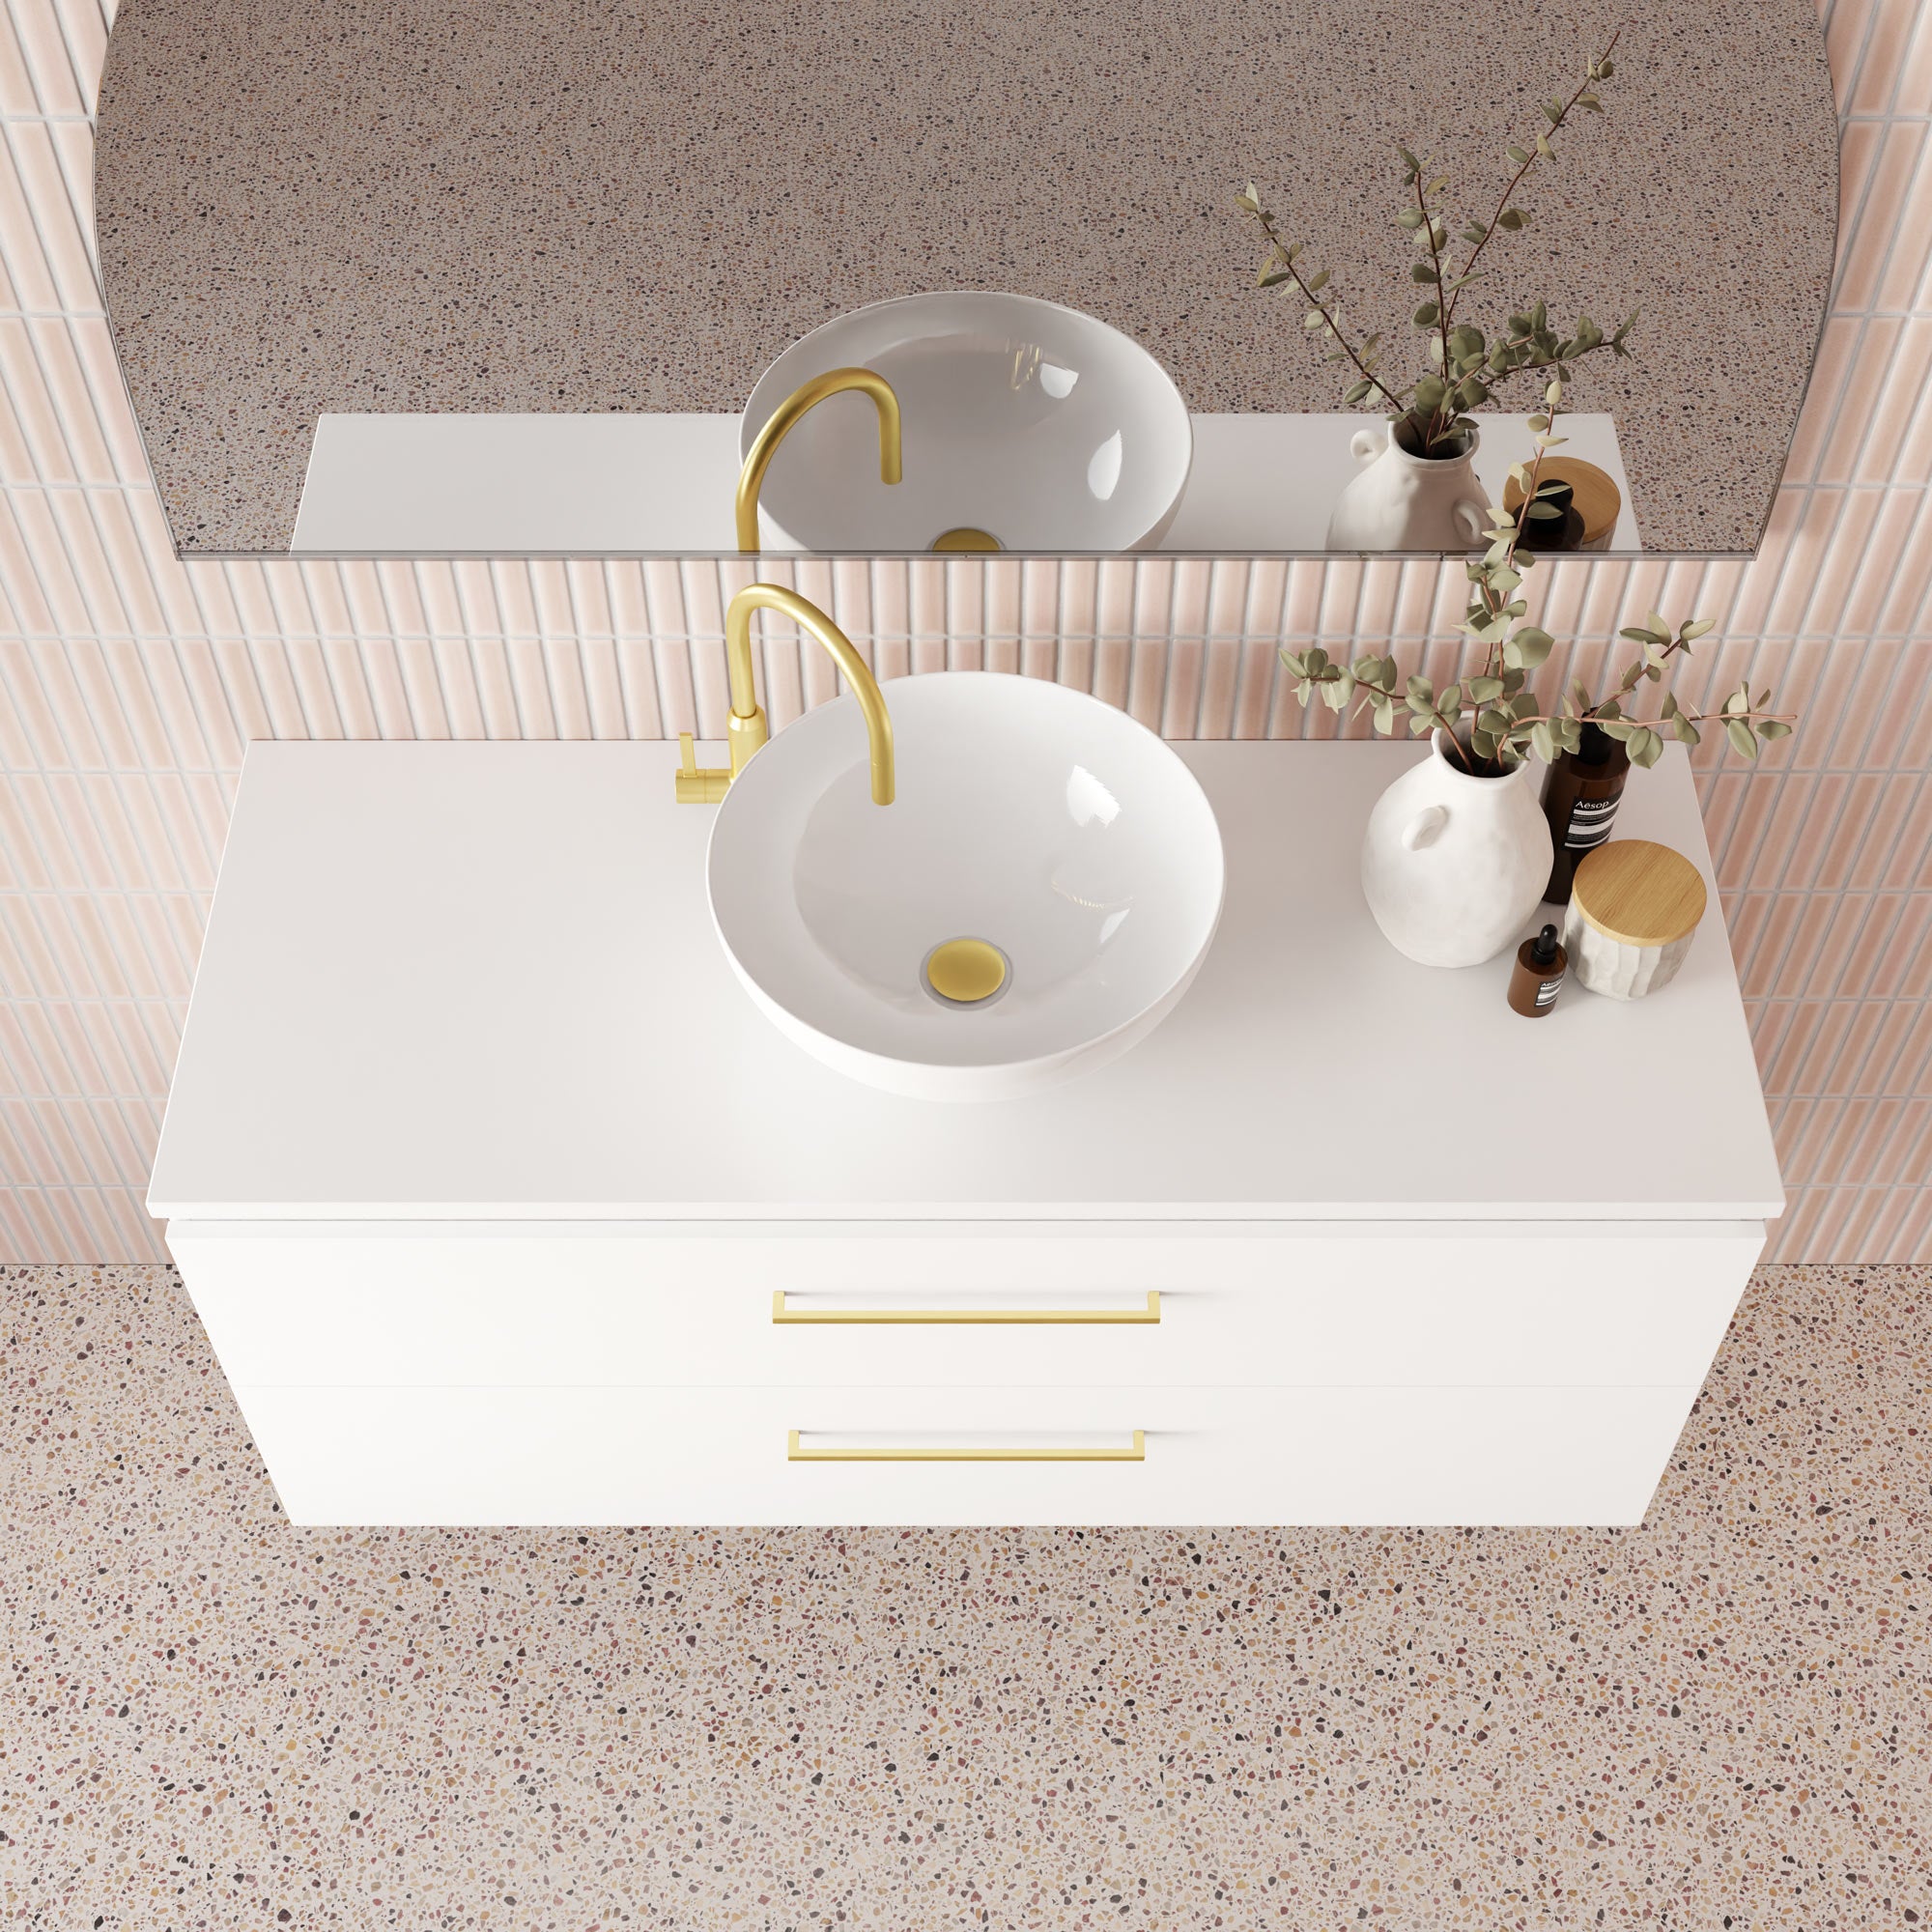 Riviera Vanity with Under-Counter Basin